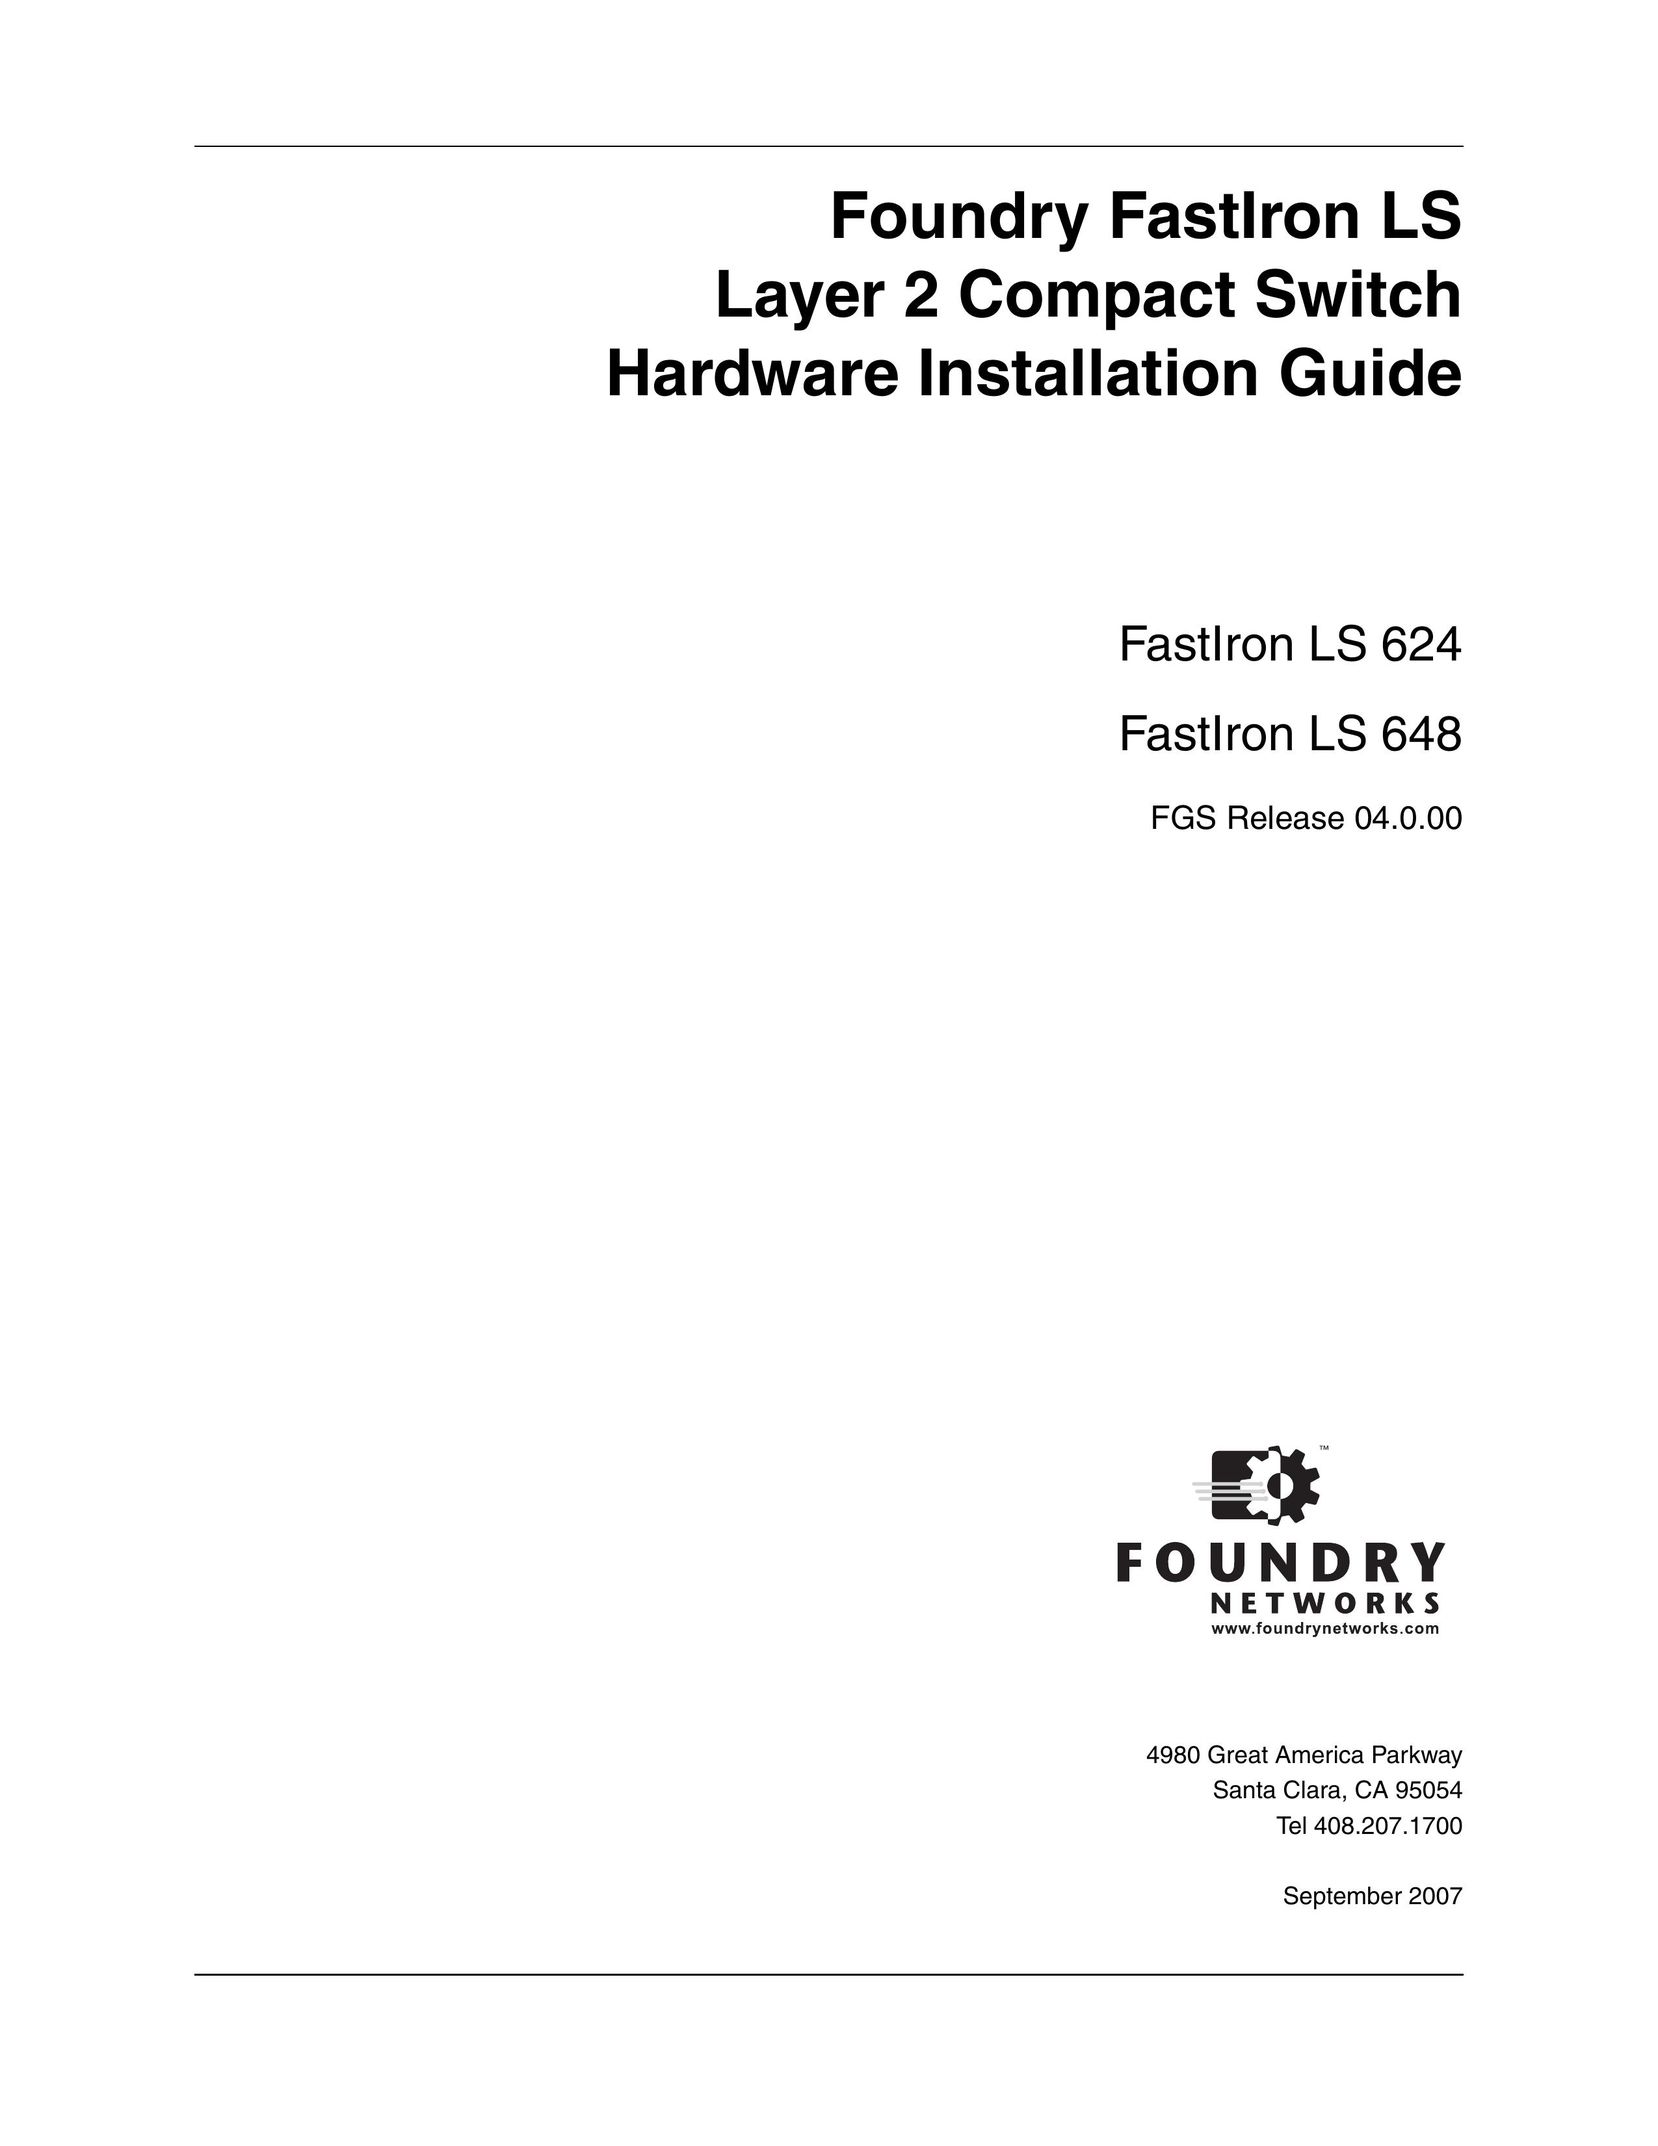 Foundry Networks LS 624 Switch User Manual